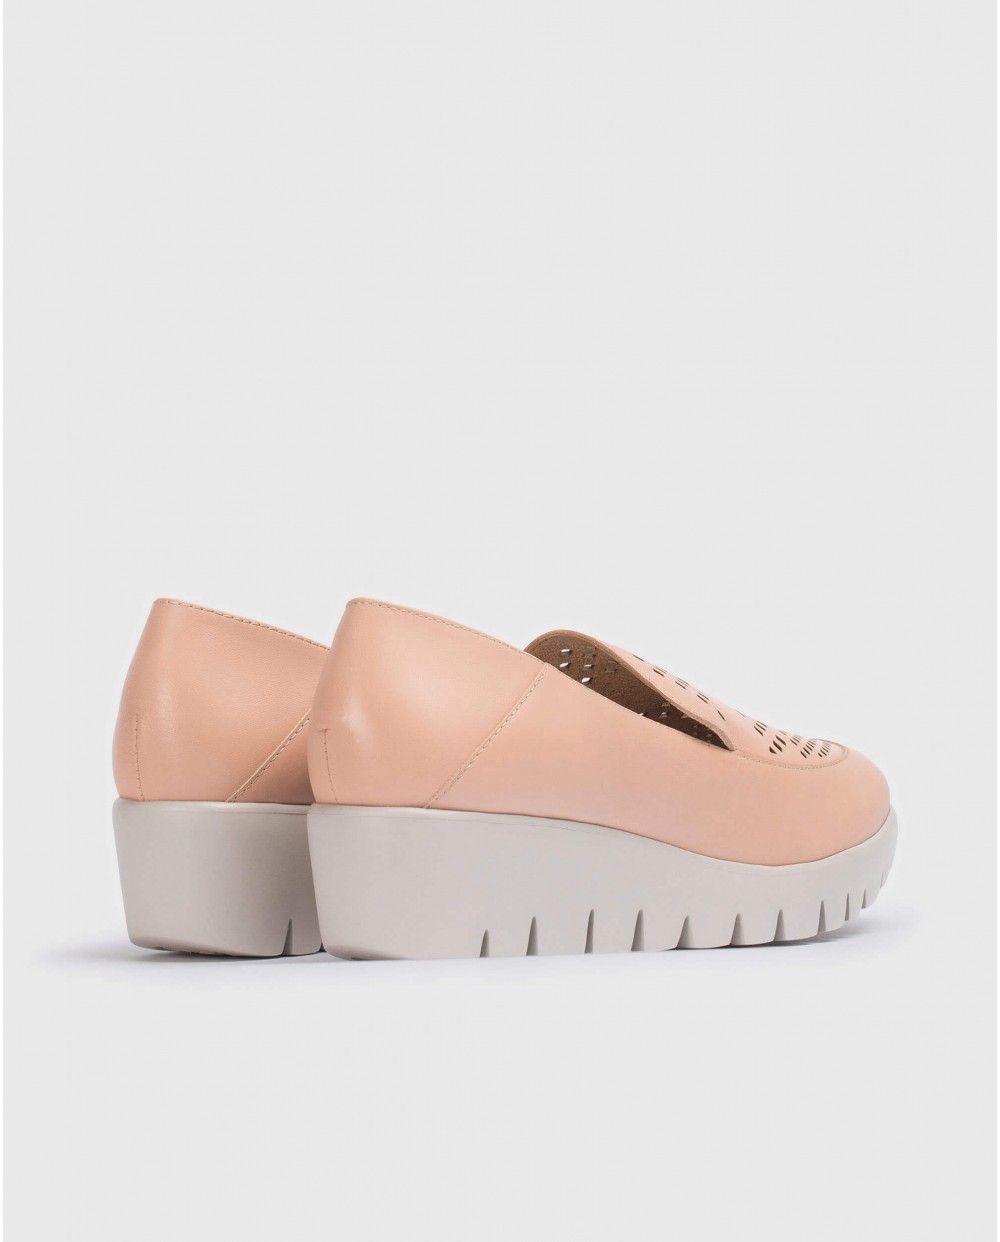 Wonders-Outlet-Leather loafer mule